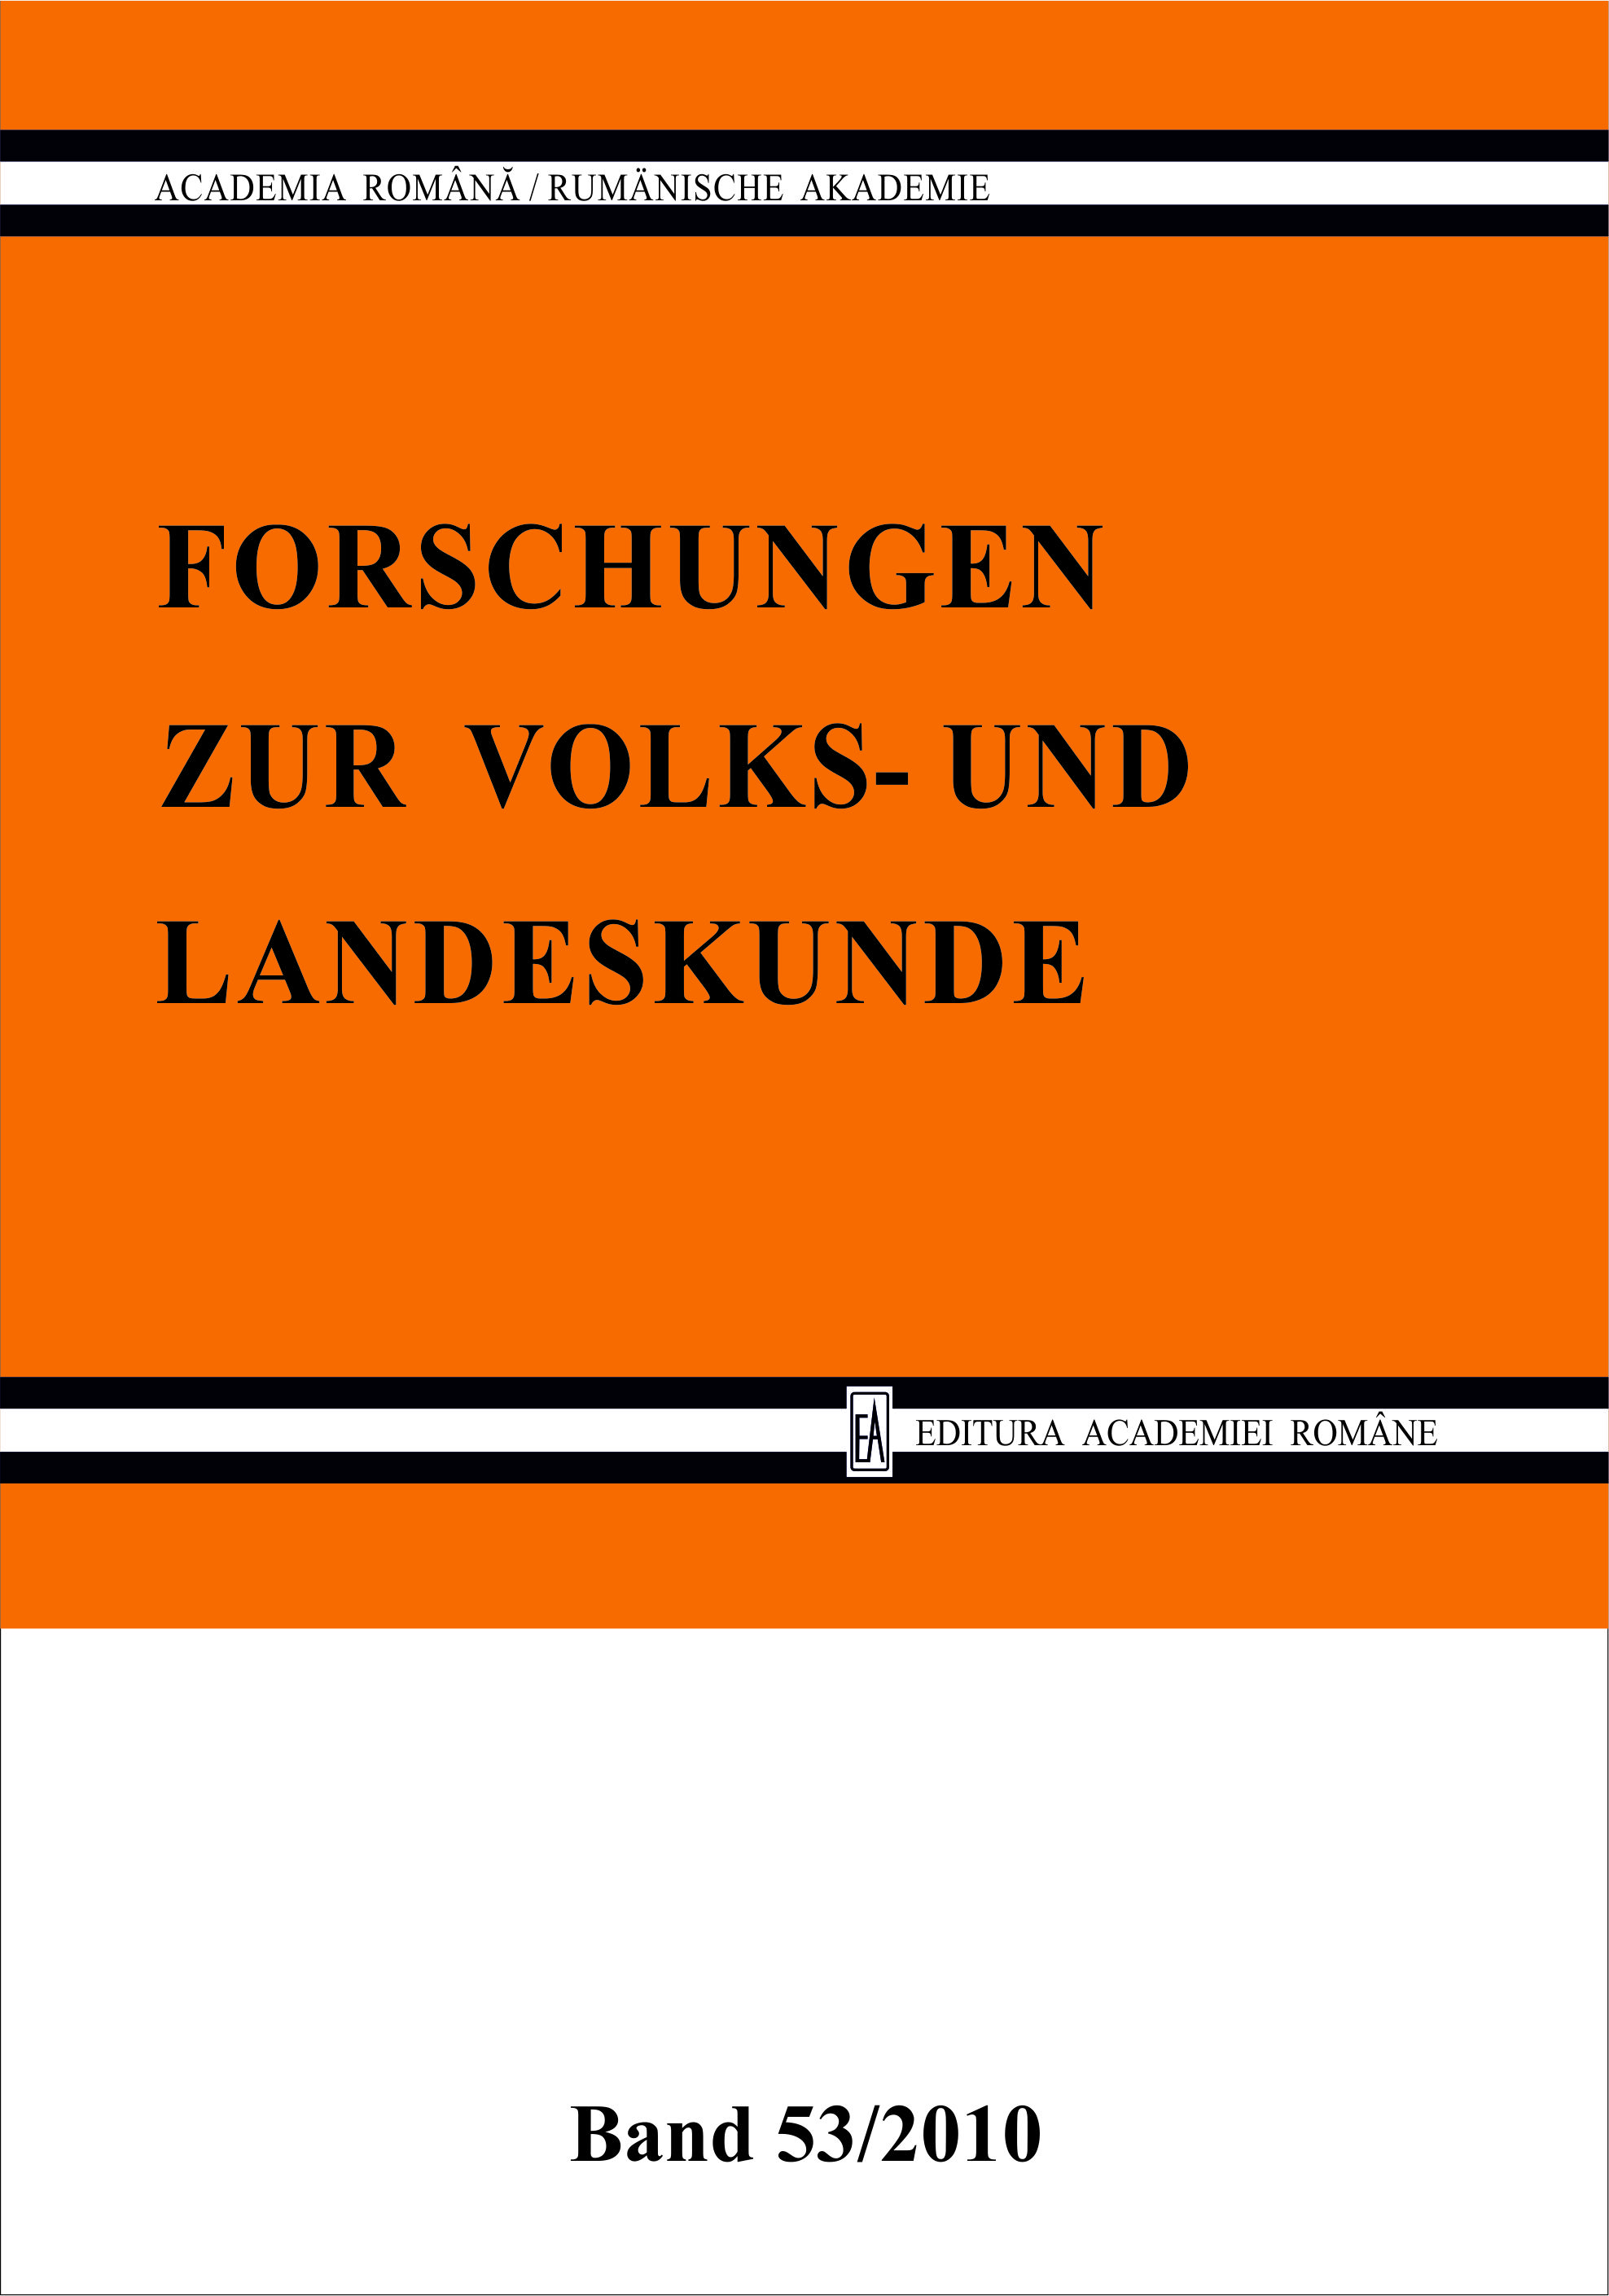 Traditional Romanian Culture and Civilization Reflected in the Journal Forschungen zur Volks- und Landeskunde 
 Cover Image